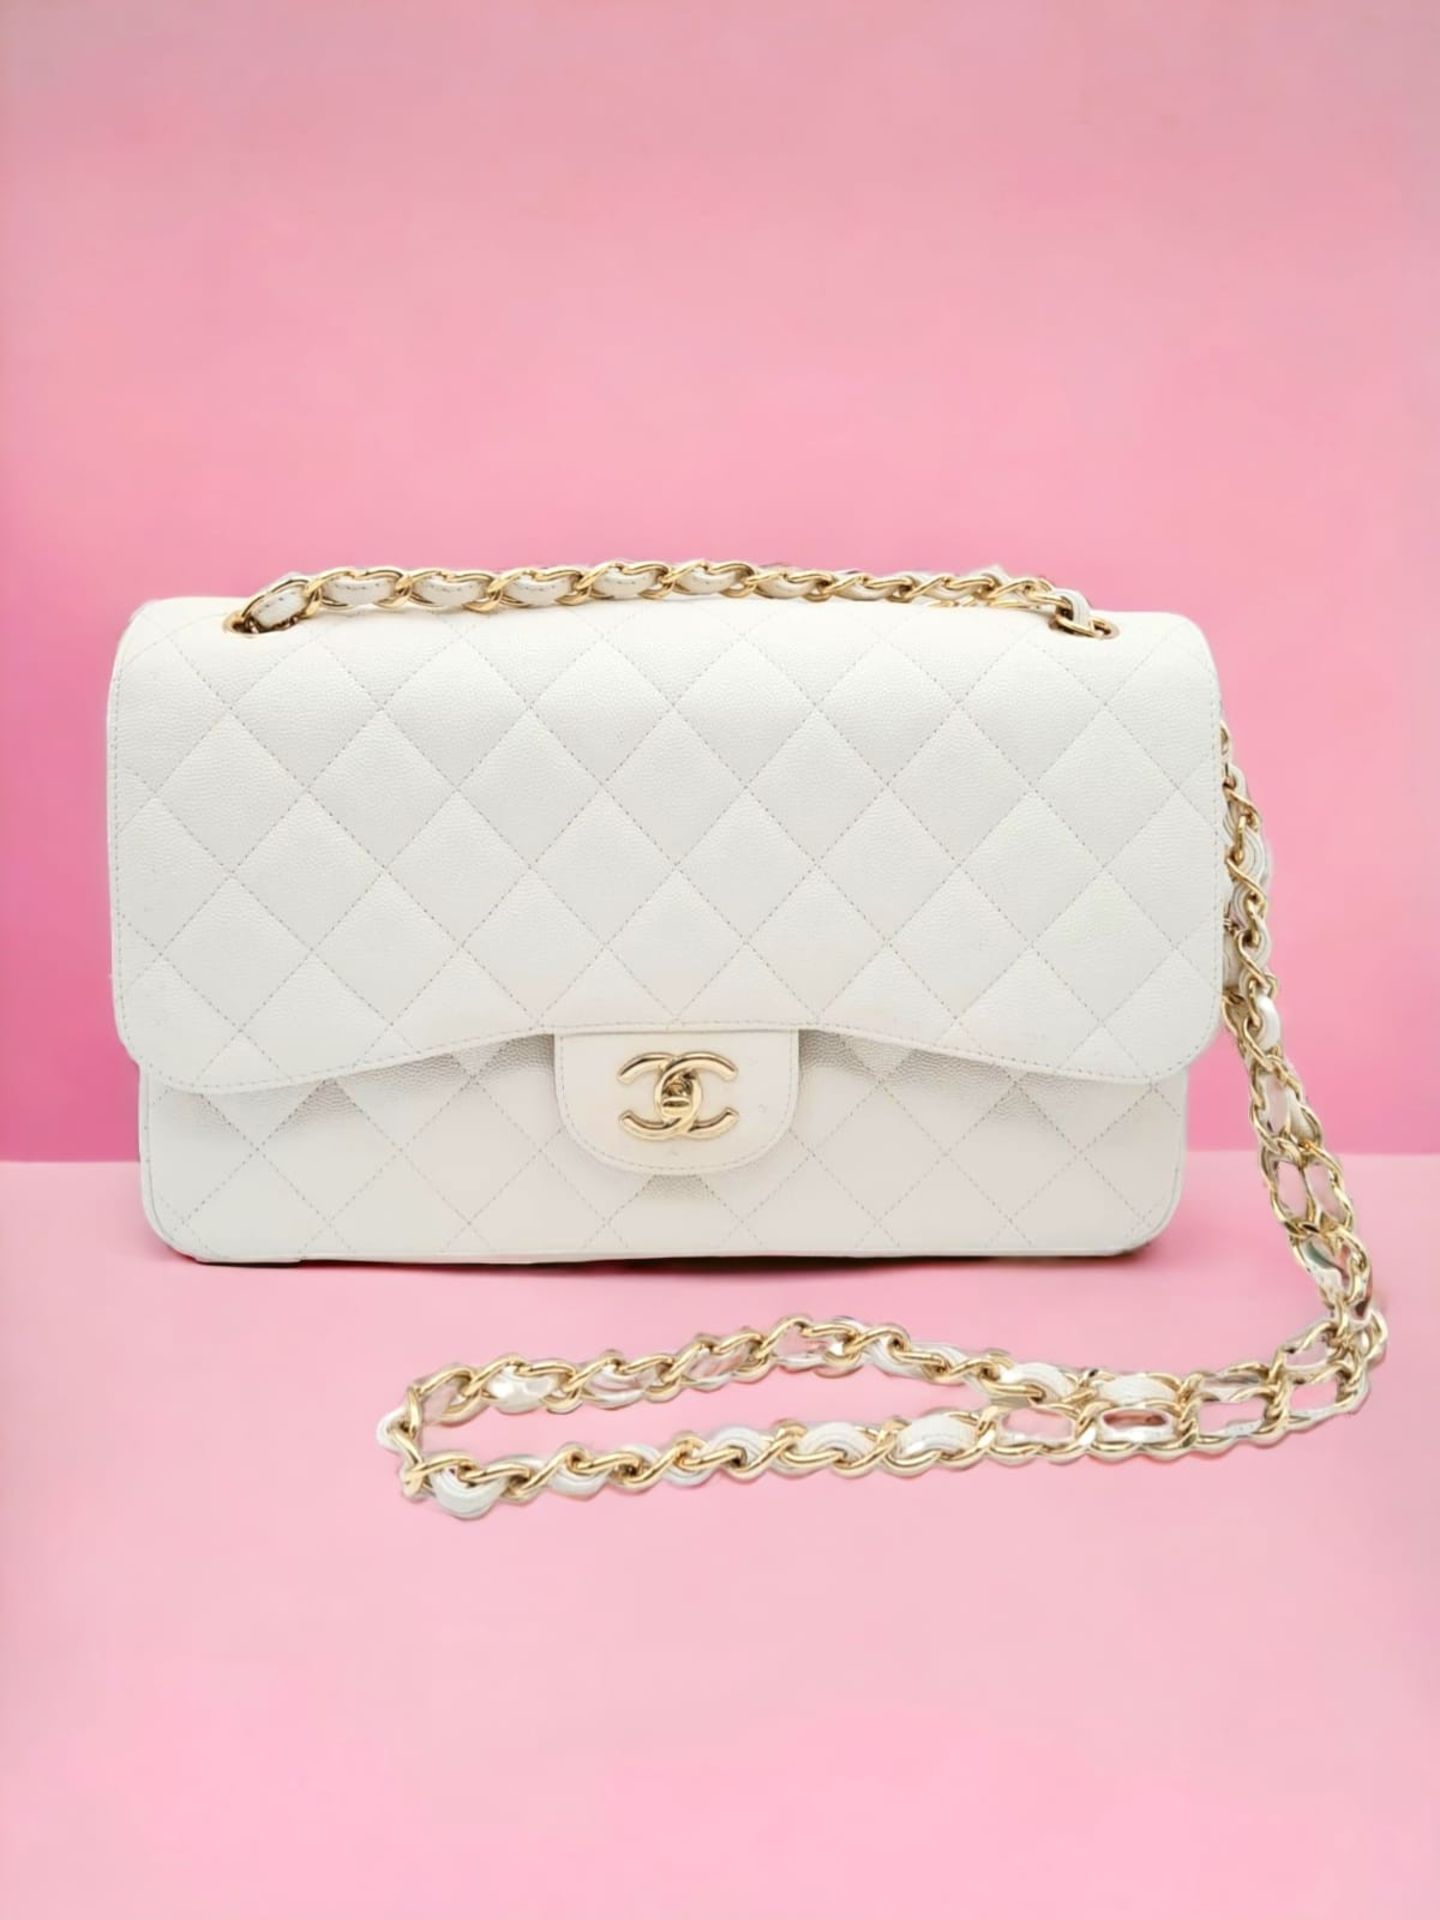 Chanel Caviar Jumbo Single Flap Bag. Quilted white caviar leather stitched in diamond pattern.